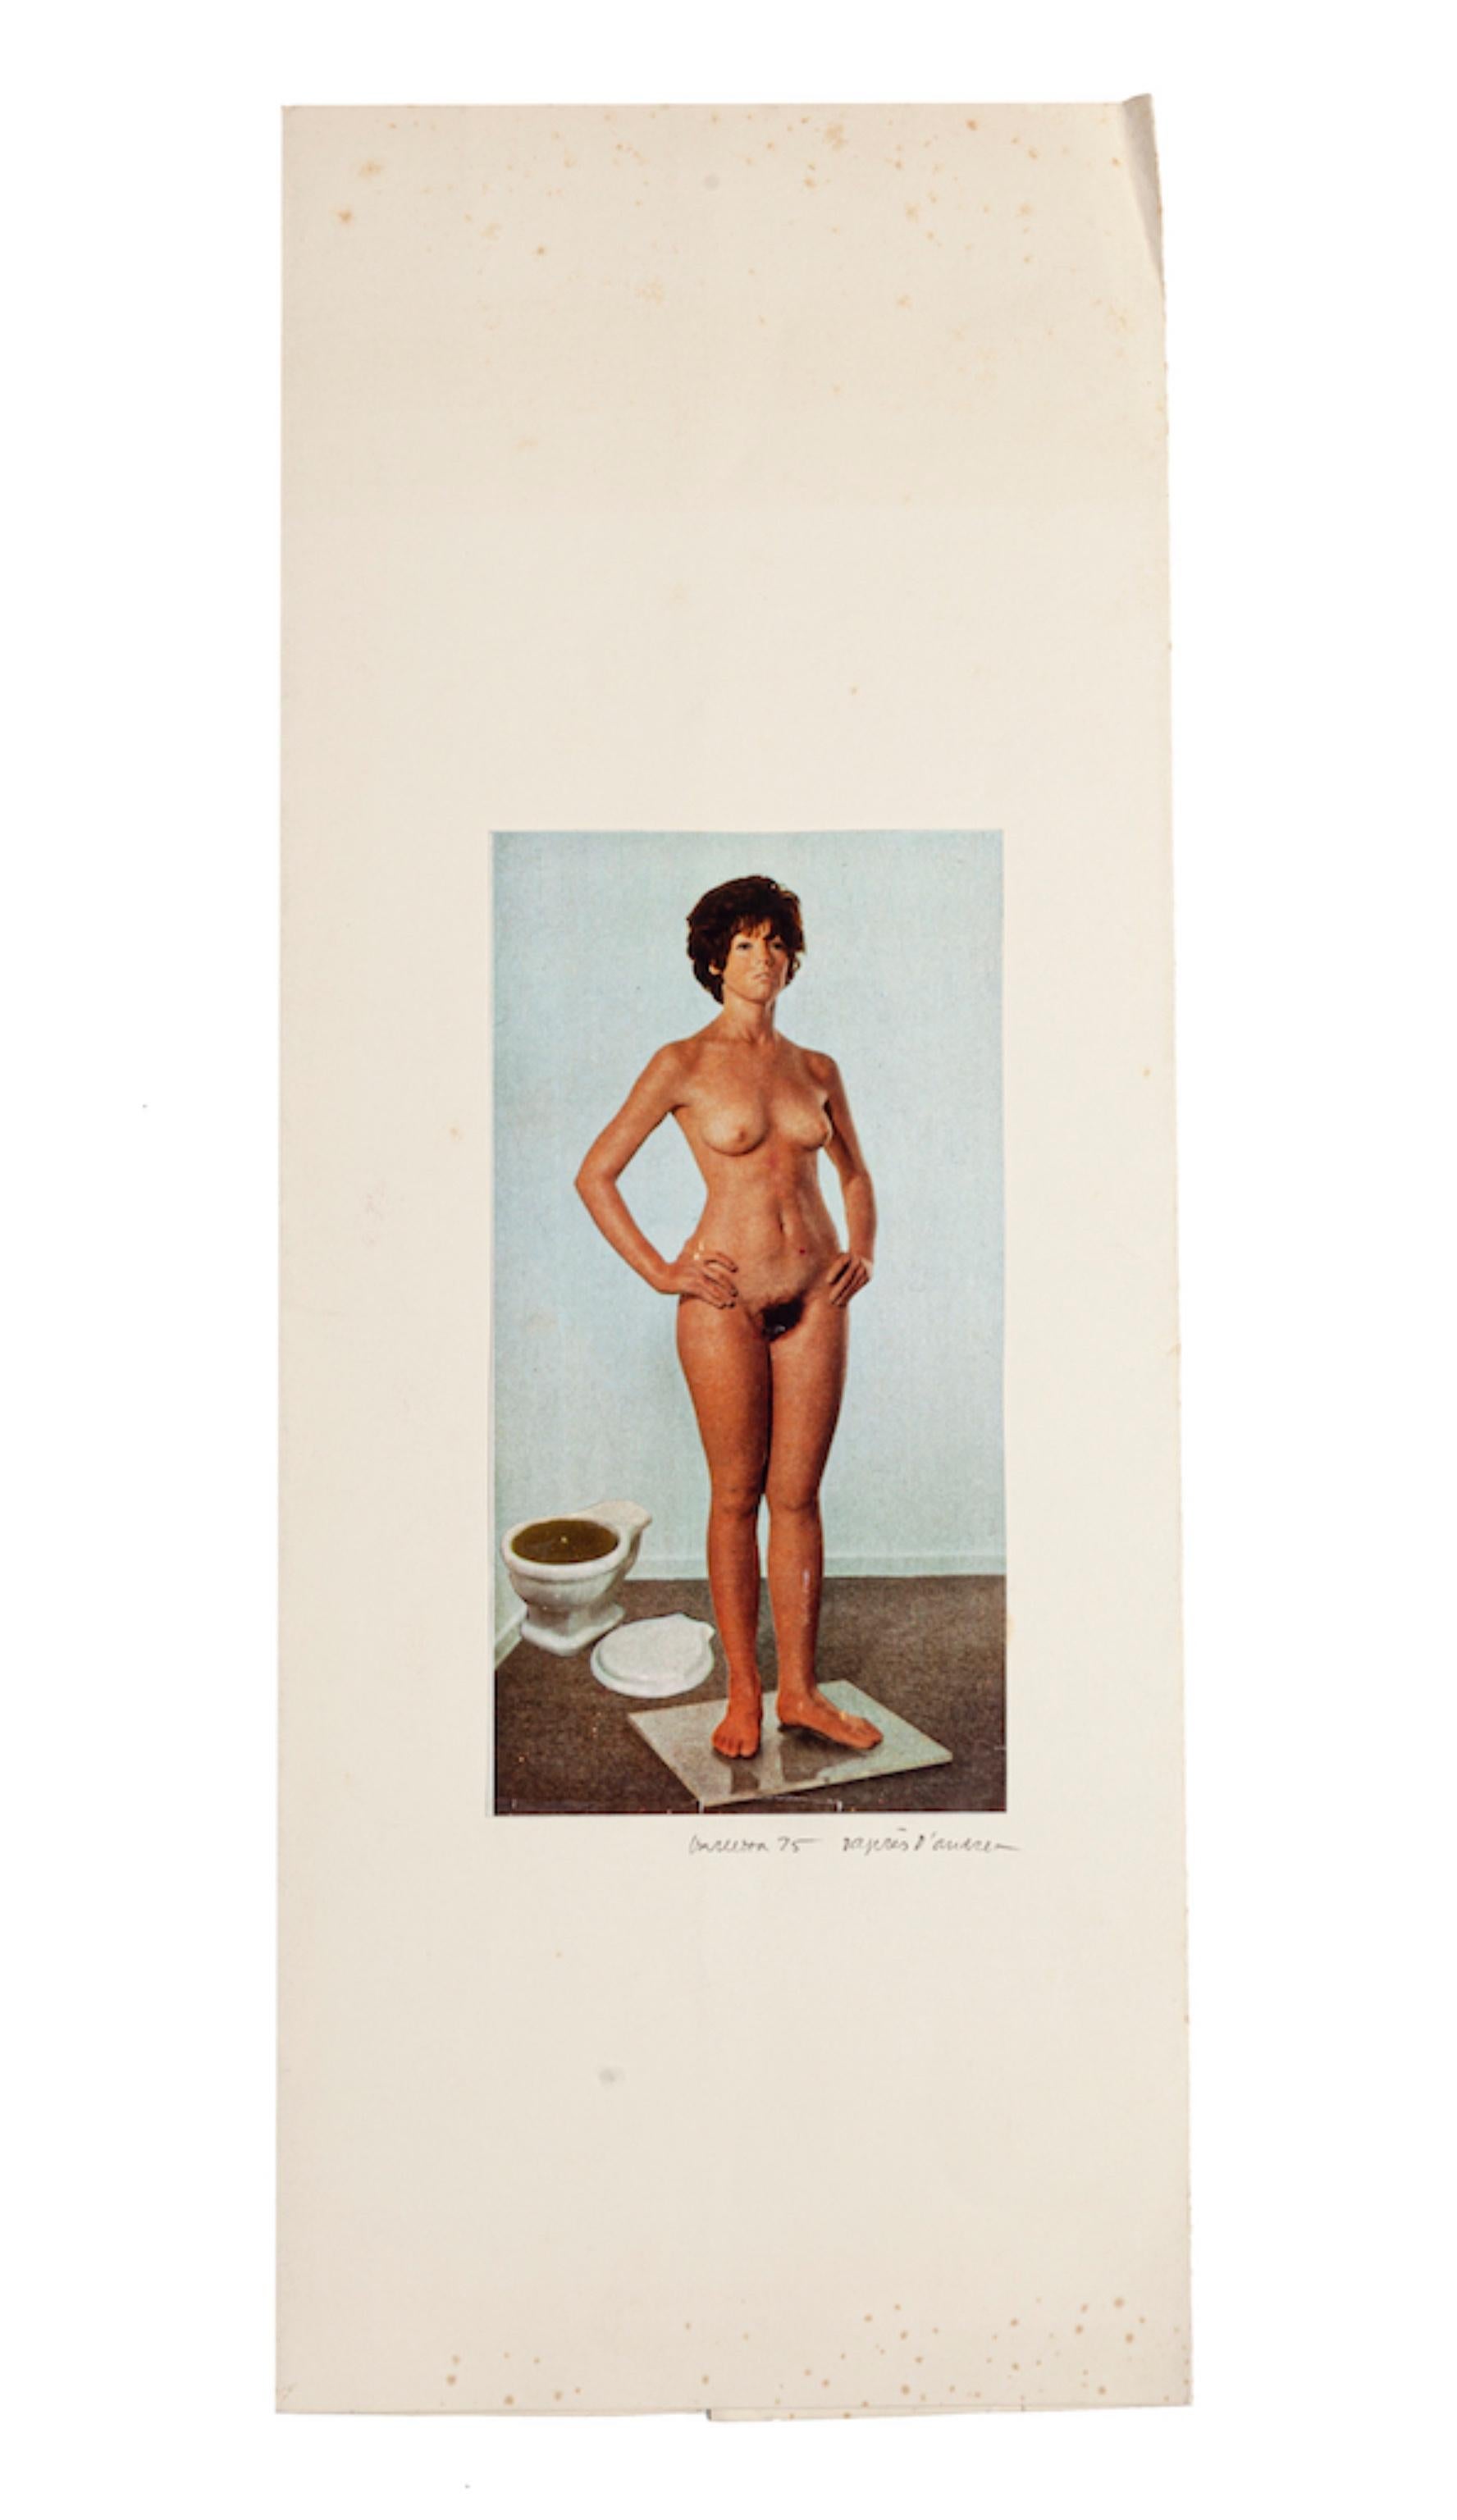 Nude is an original collage artwork, realized by Sergio Barletta in 1975.

Hand-signed on the lower right and dated. Image Dimensions: 19 x 10 cm

In very good conditions, except for some small folding and diffused foxing along the margins, which